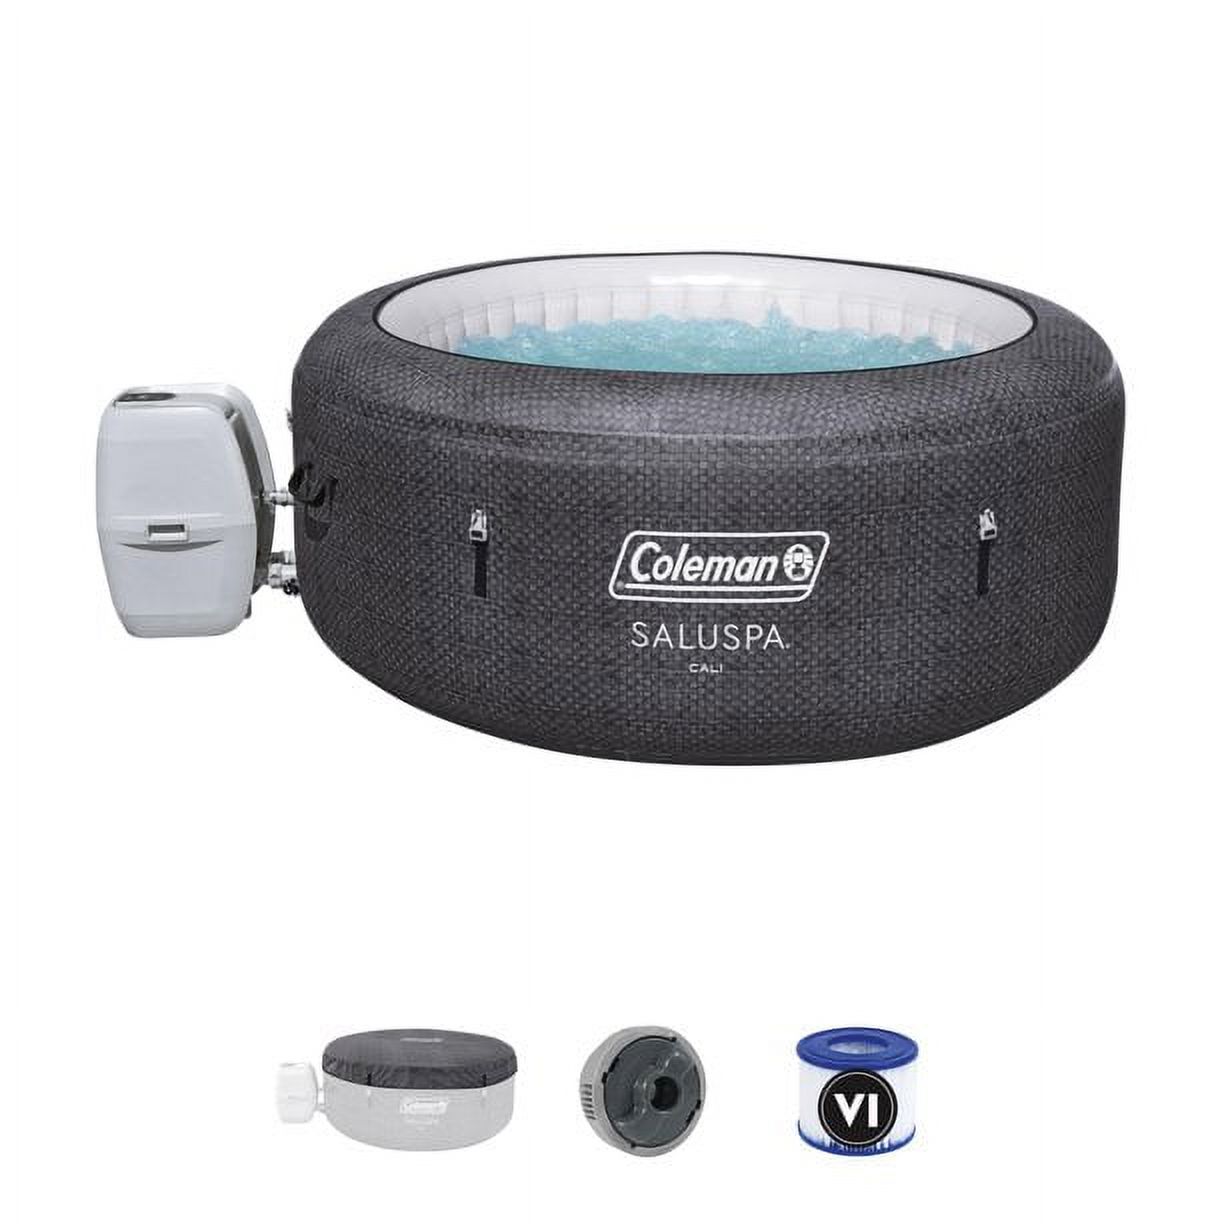 Coleman Cali Energy Sense 177 gal. Spring Inflatable Hot Tub Spa 2-4 Person, 104˚F - image 5 of 8